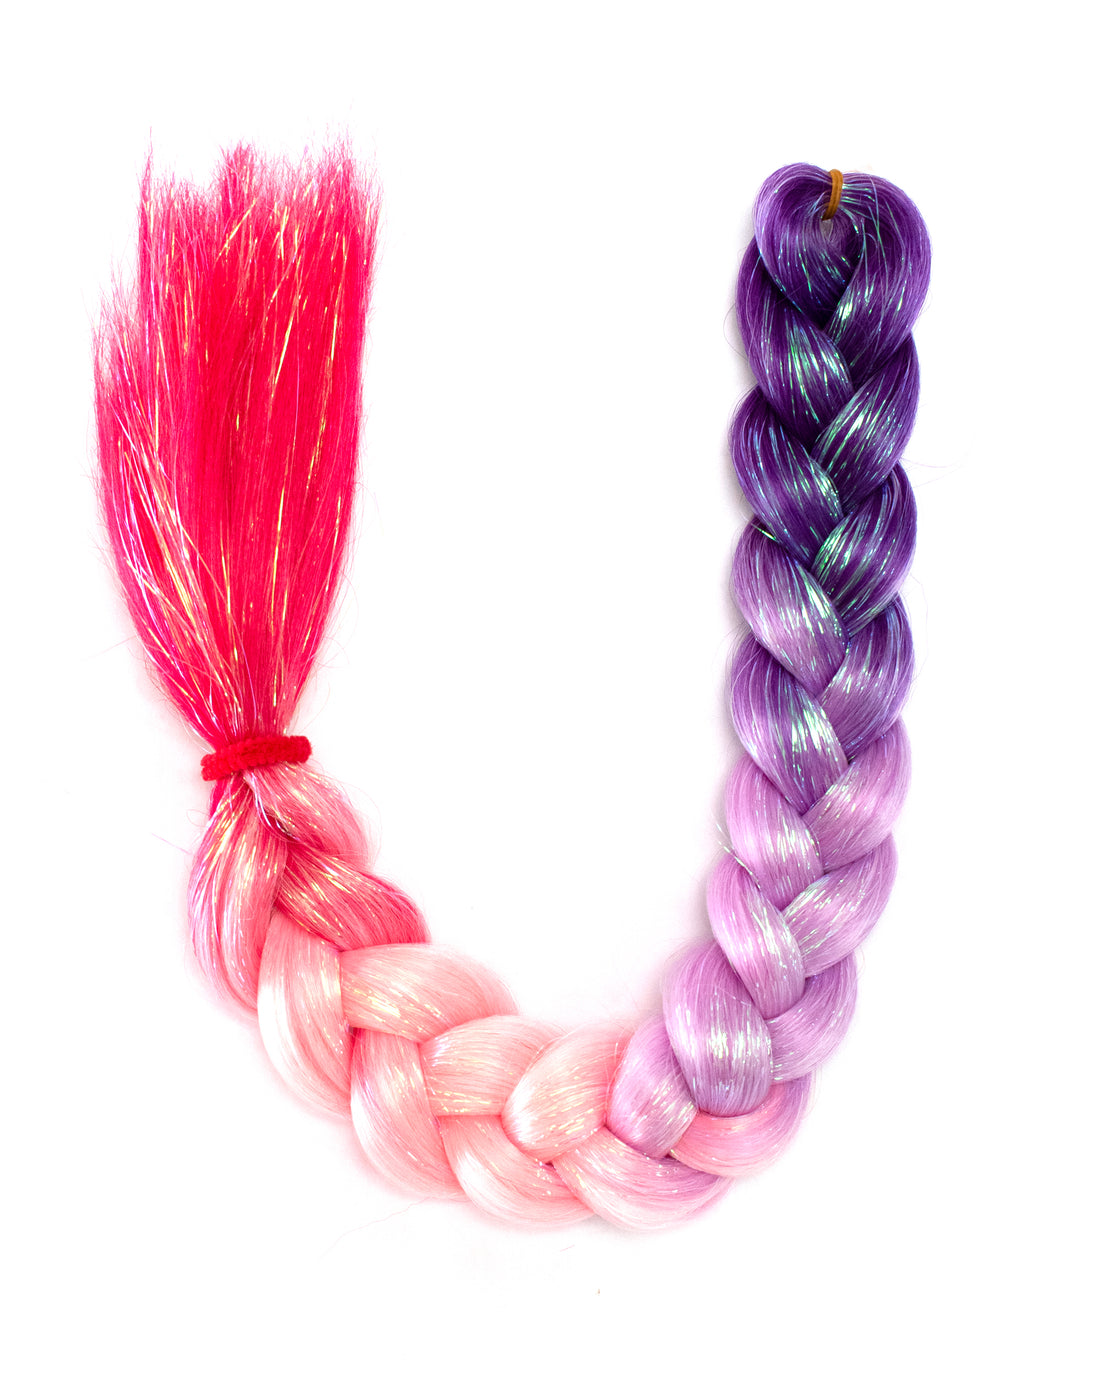 Sunrise - Purple Pink Red Ombre Braid-In Hair with Tinsel